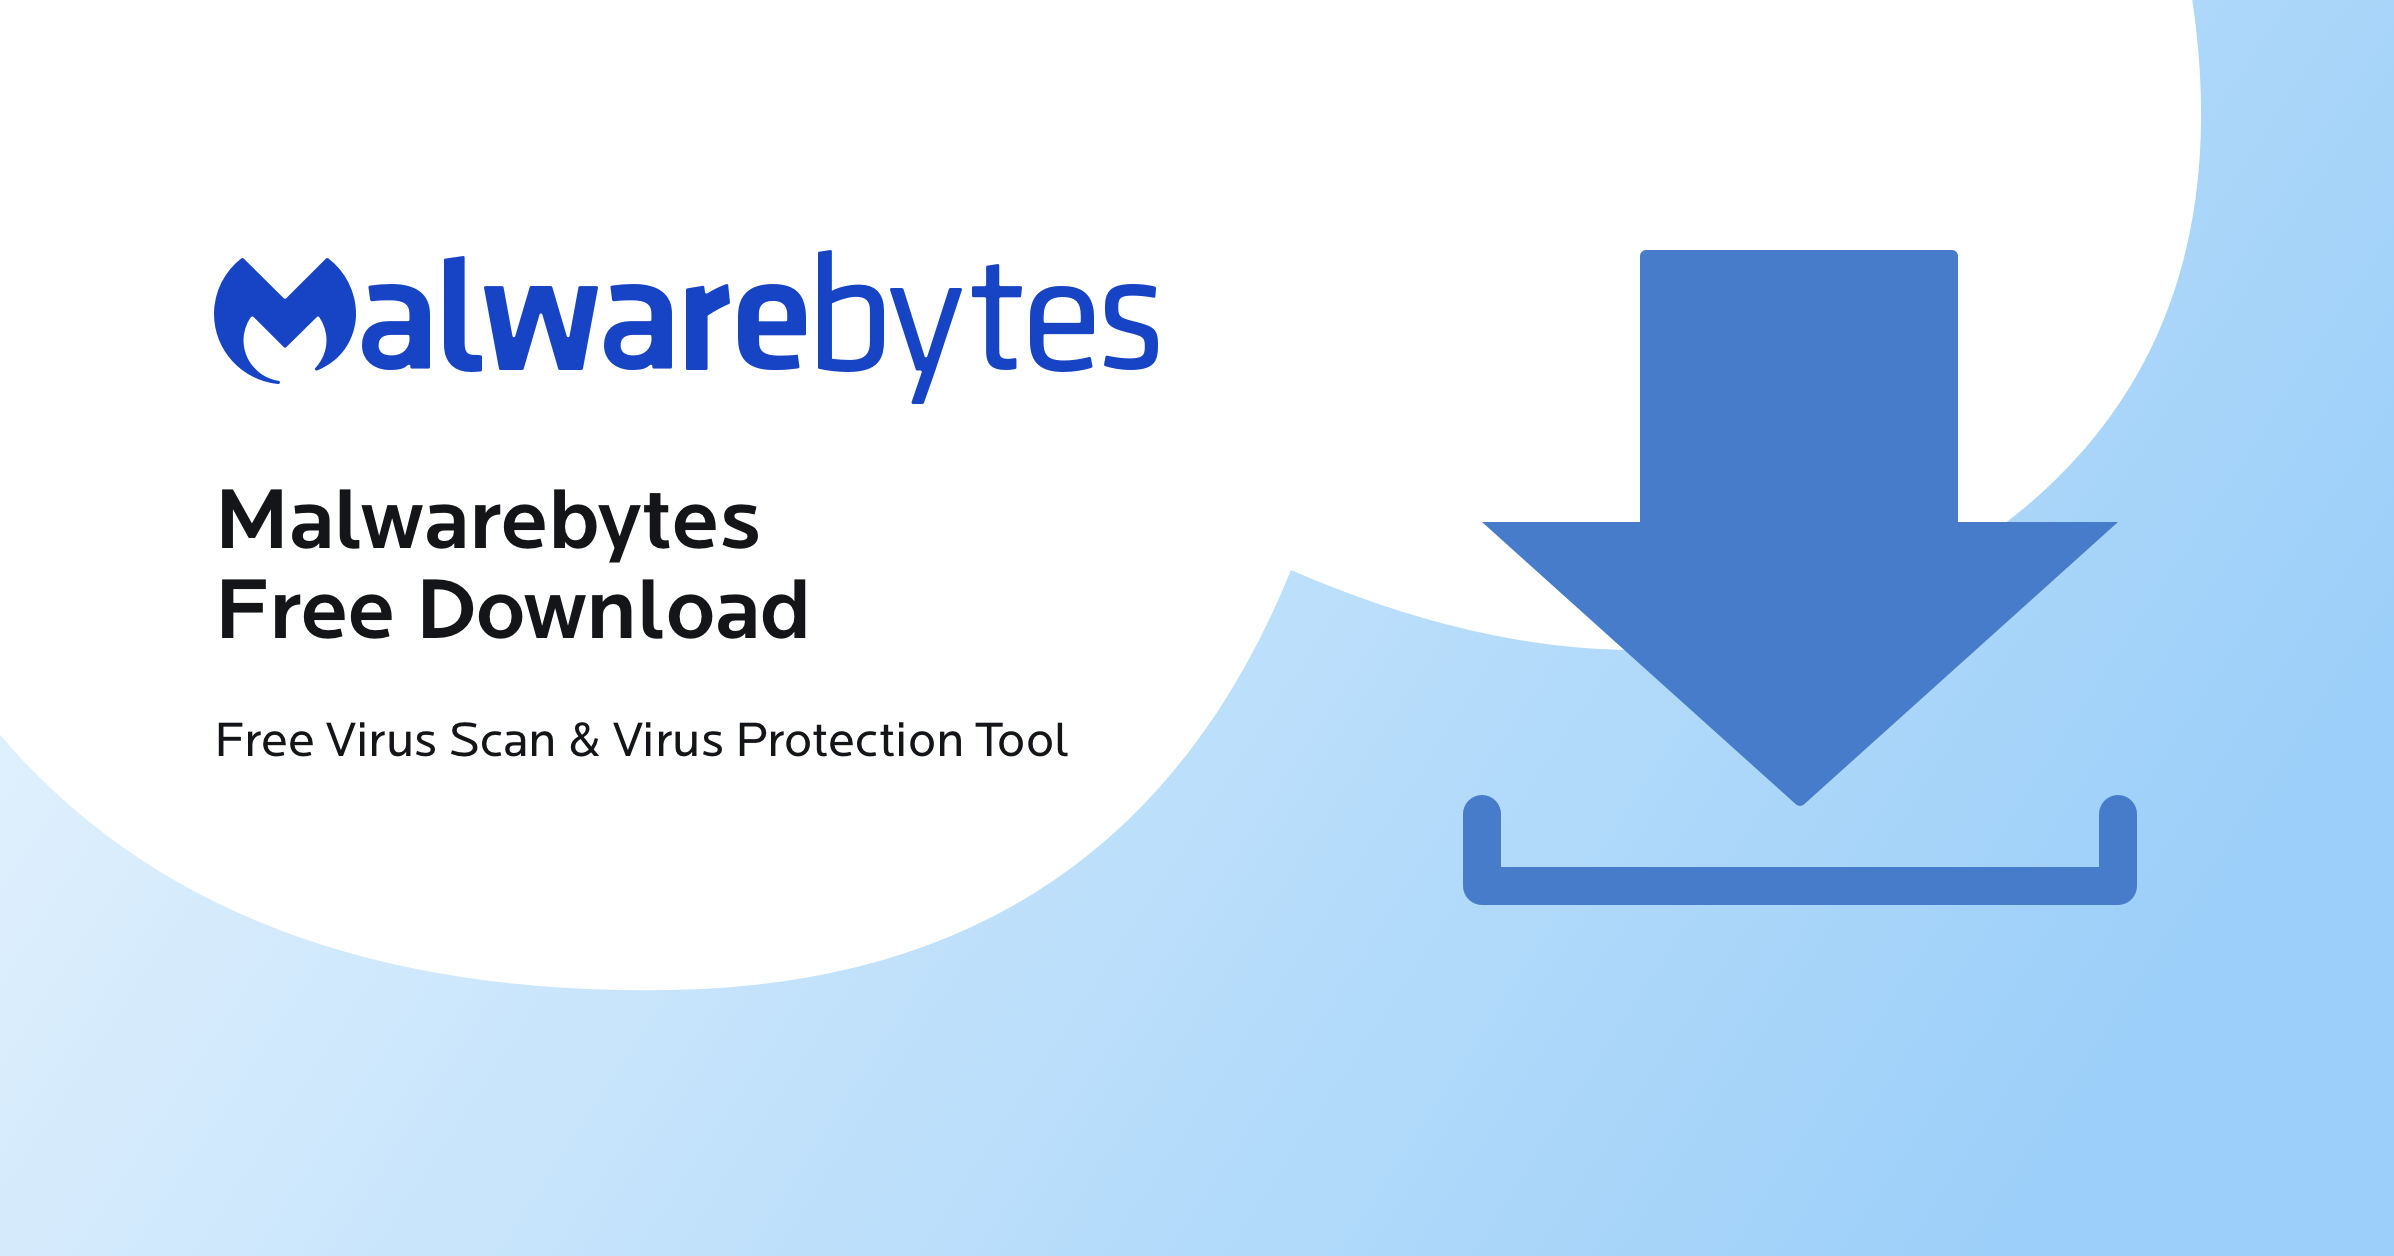 Install a reputable antivirus or antimalware software if you don't have one already.
Run a full system scan to detect and remove any malware or viruses.